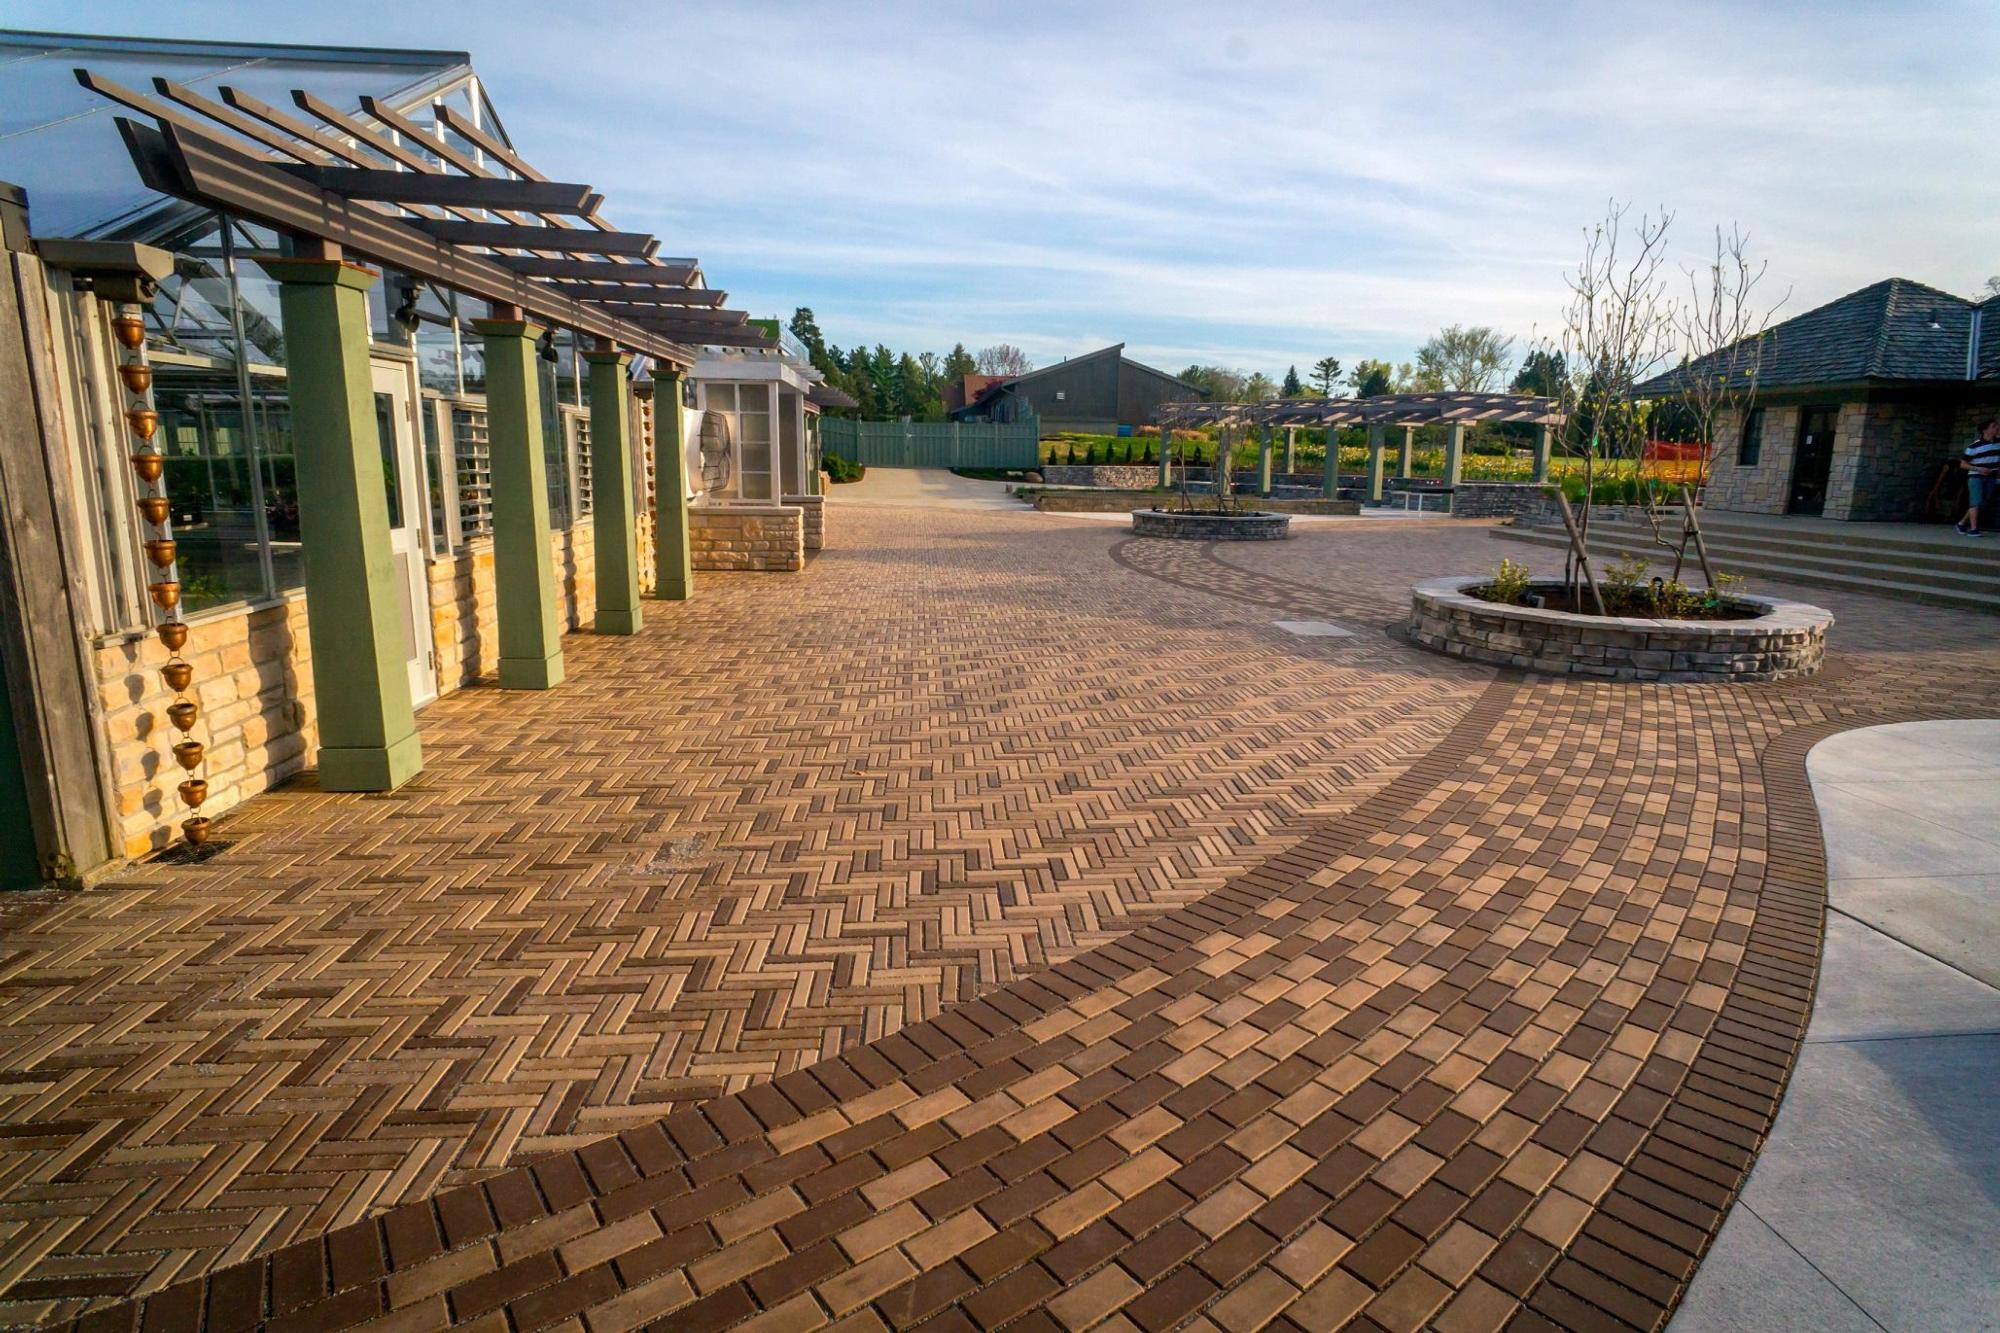 The brick walkway of Barbara Cox Center for Sustainable Horticulture